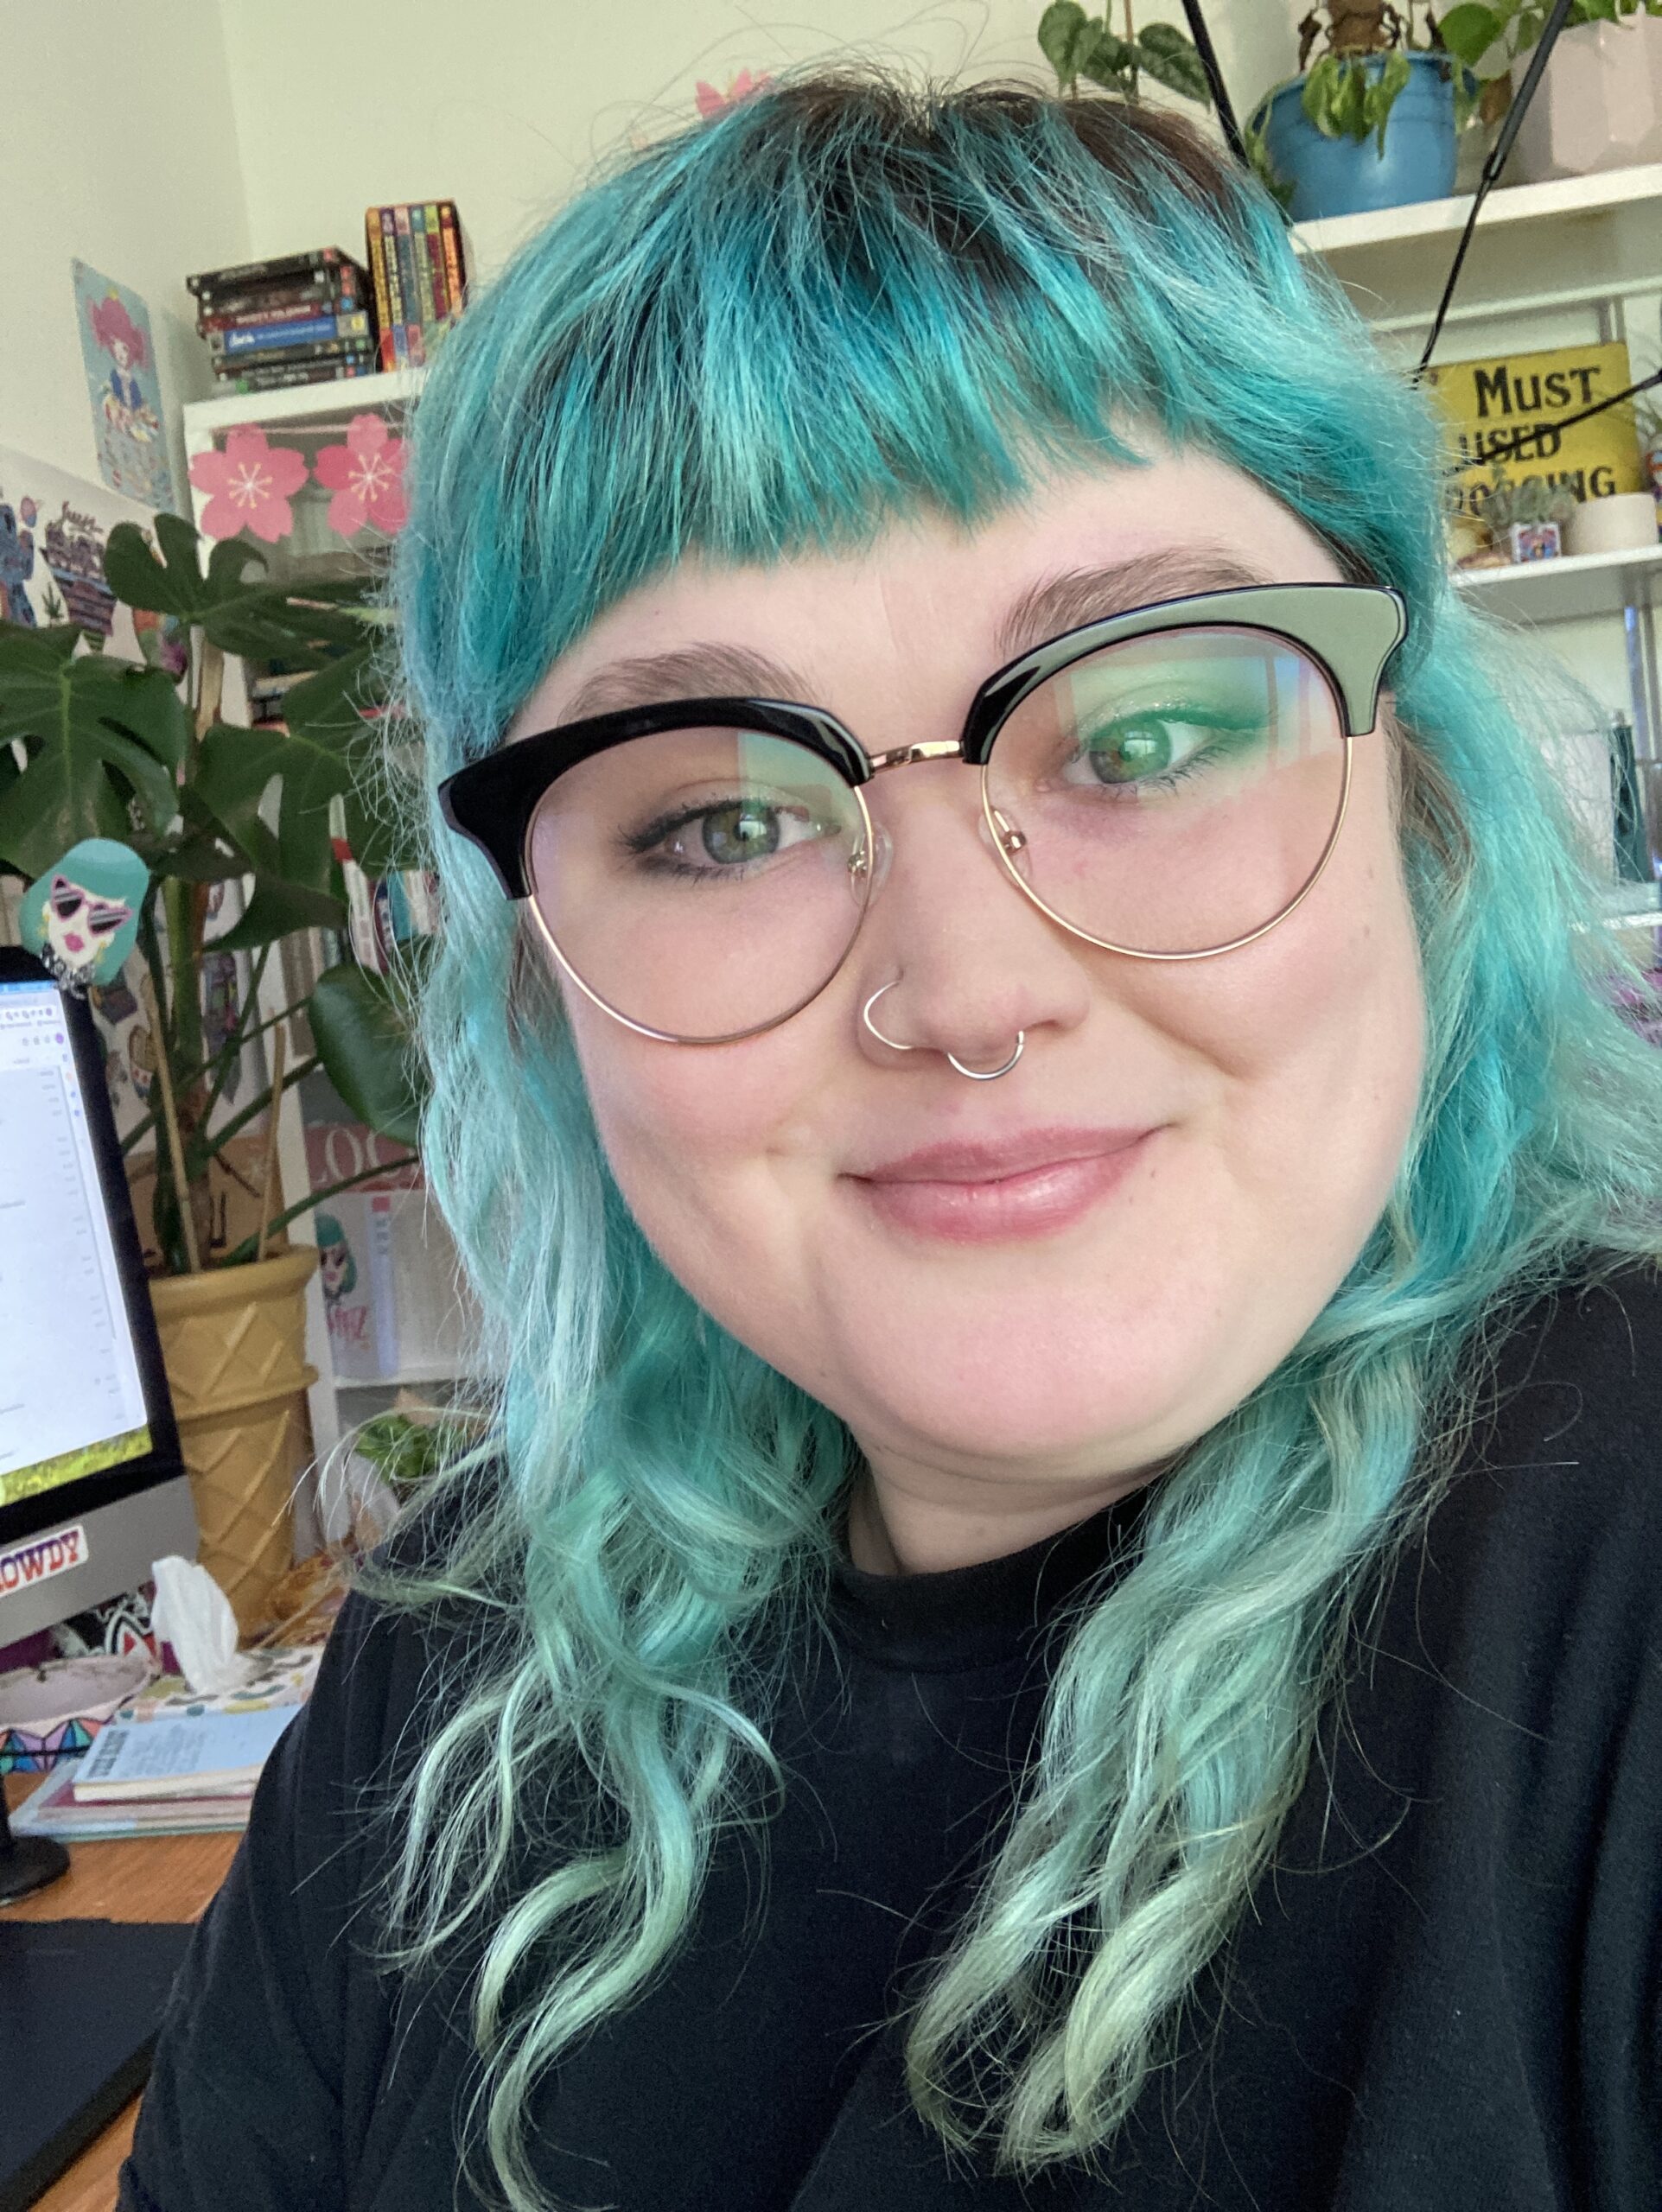 Photograph of Emma 'Bambz' Beukers. Emma is smiling, has blue tinted hair and is wearing glasses with black rims at the top. Emma is in her studio.